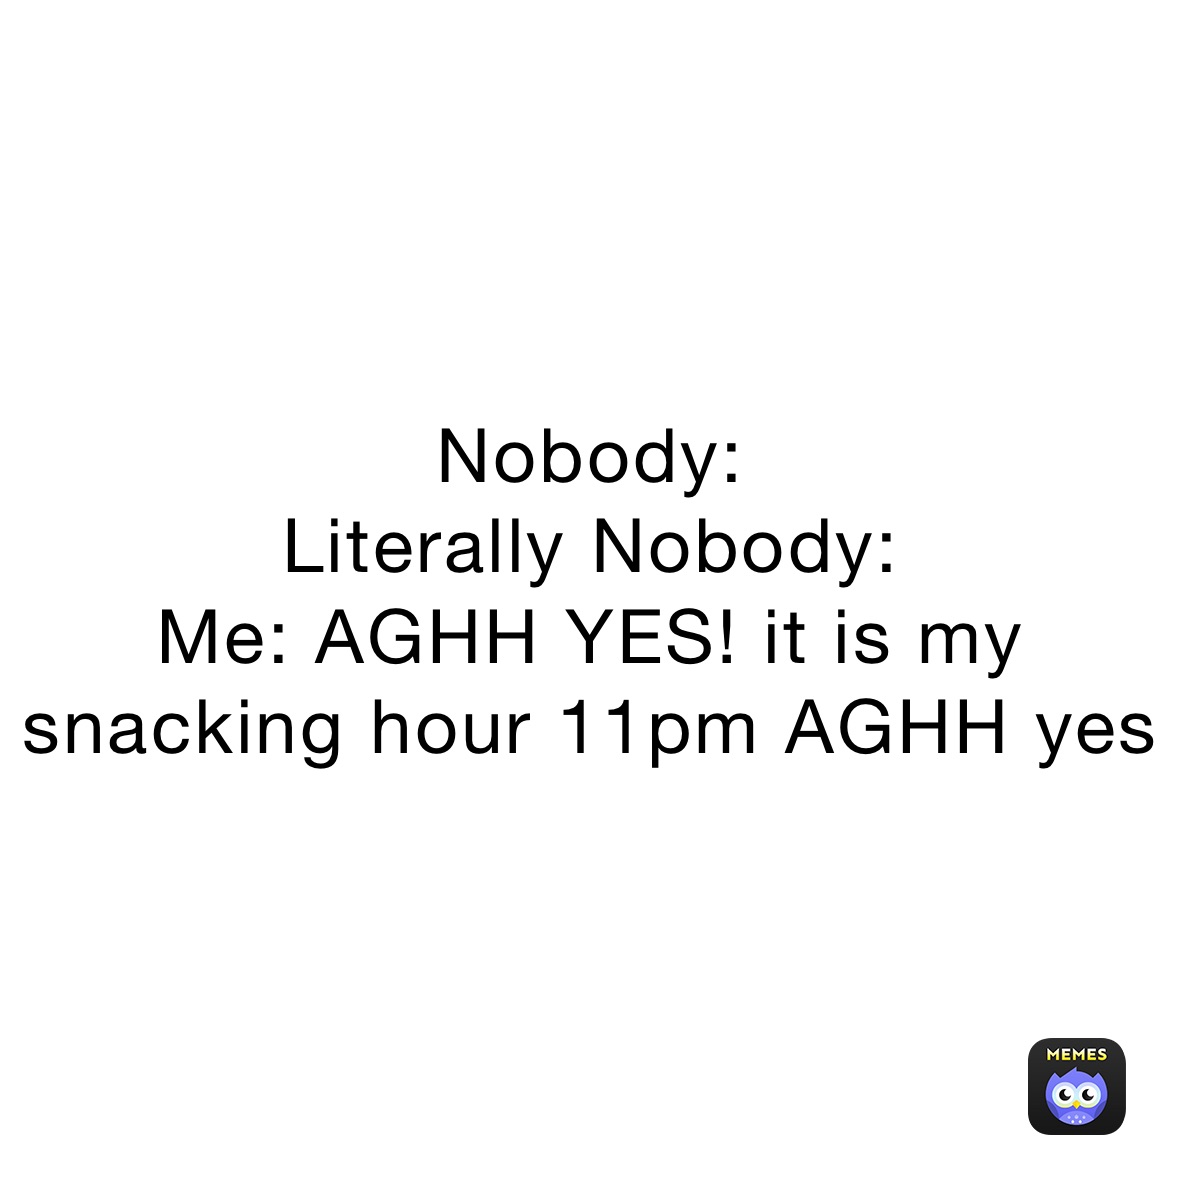 Nobody:
Literally Nobody:
Me: AGHH YES! it is my snacking hour 11pm AGHH yes